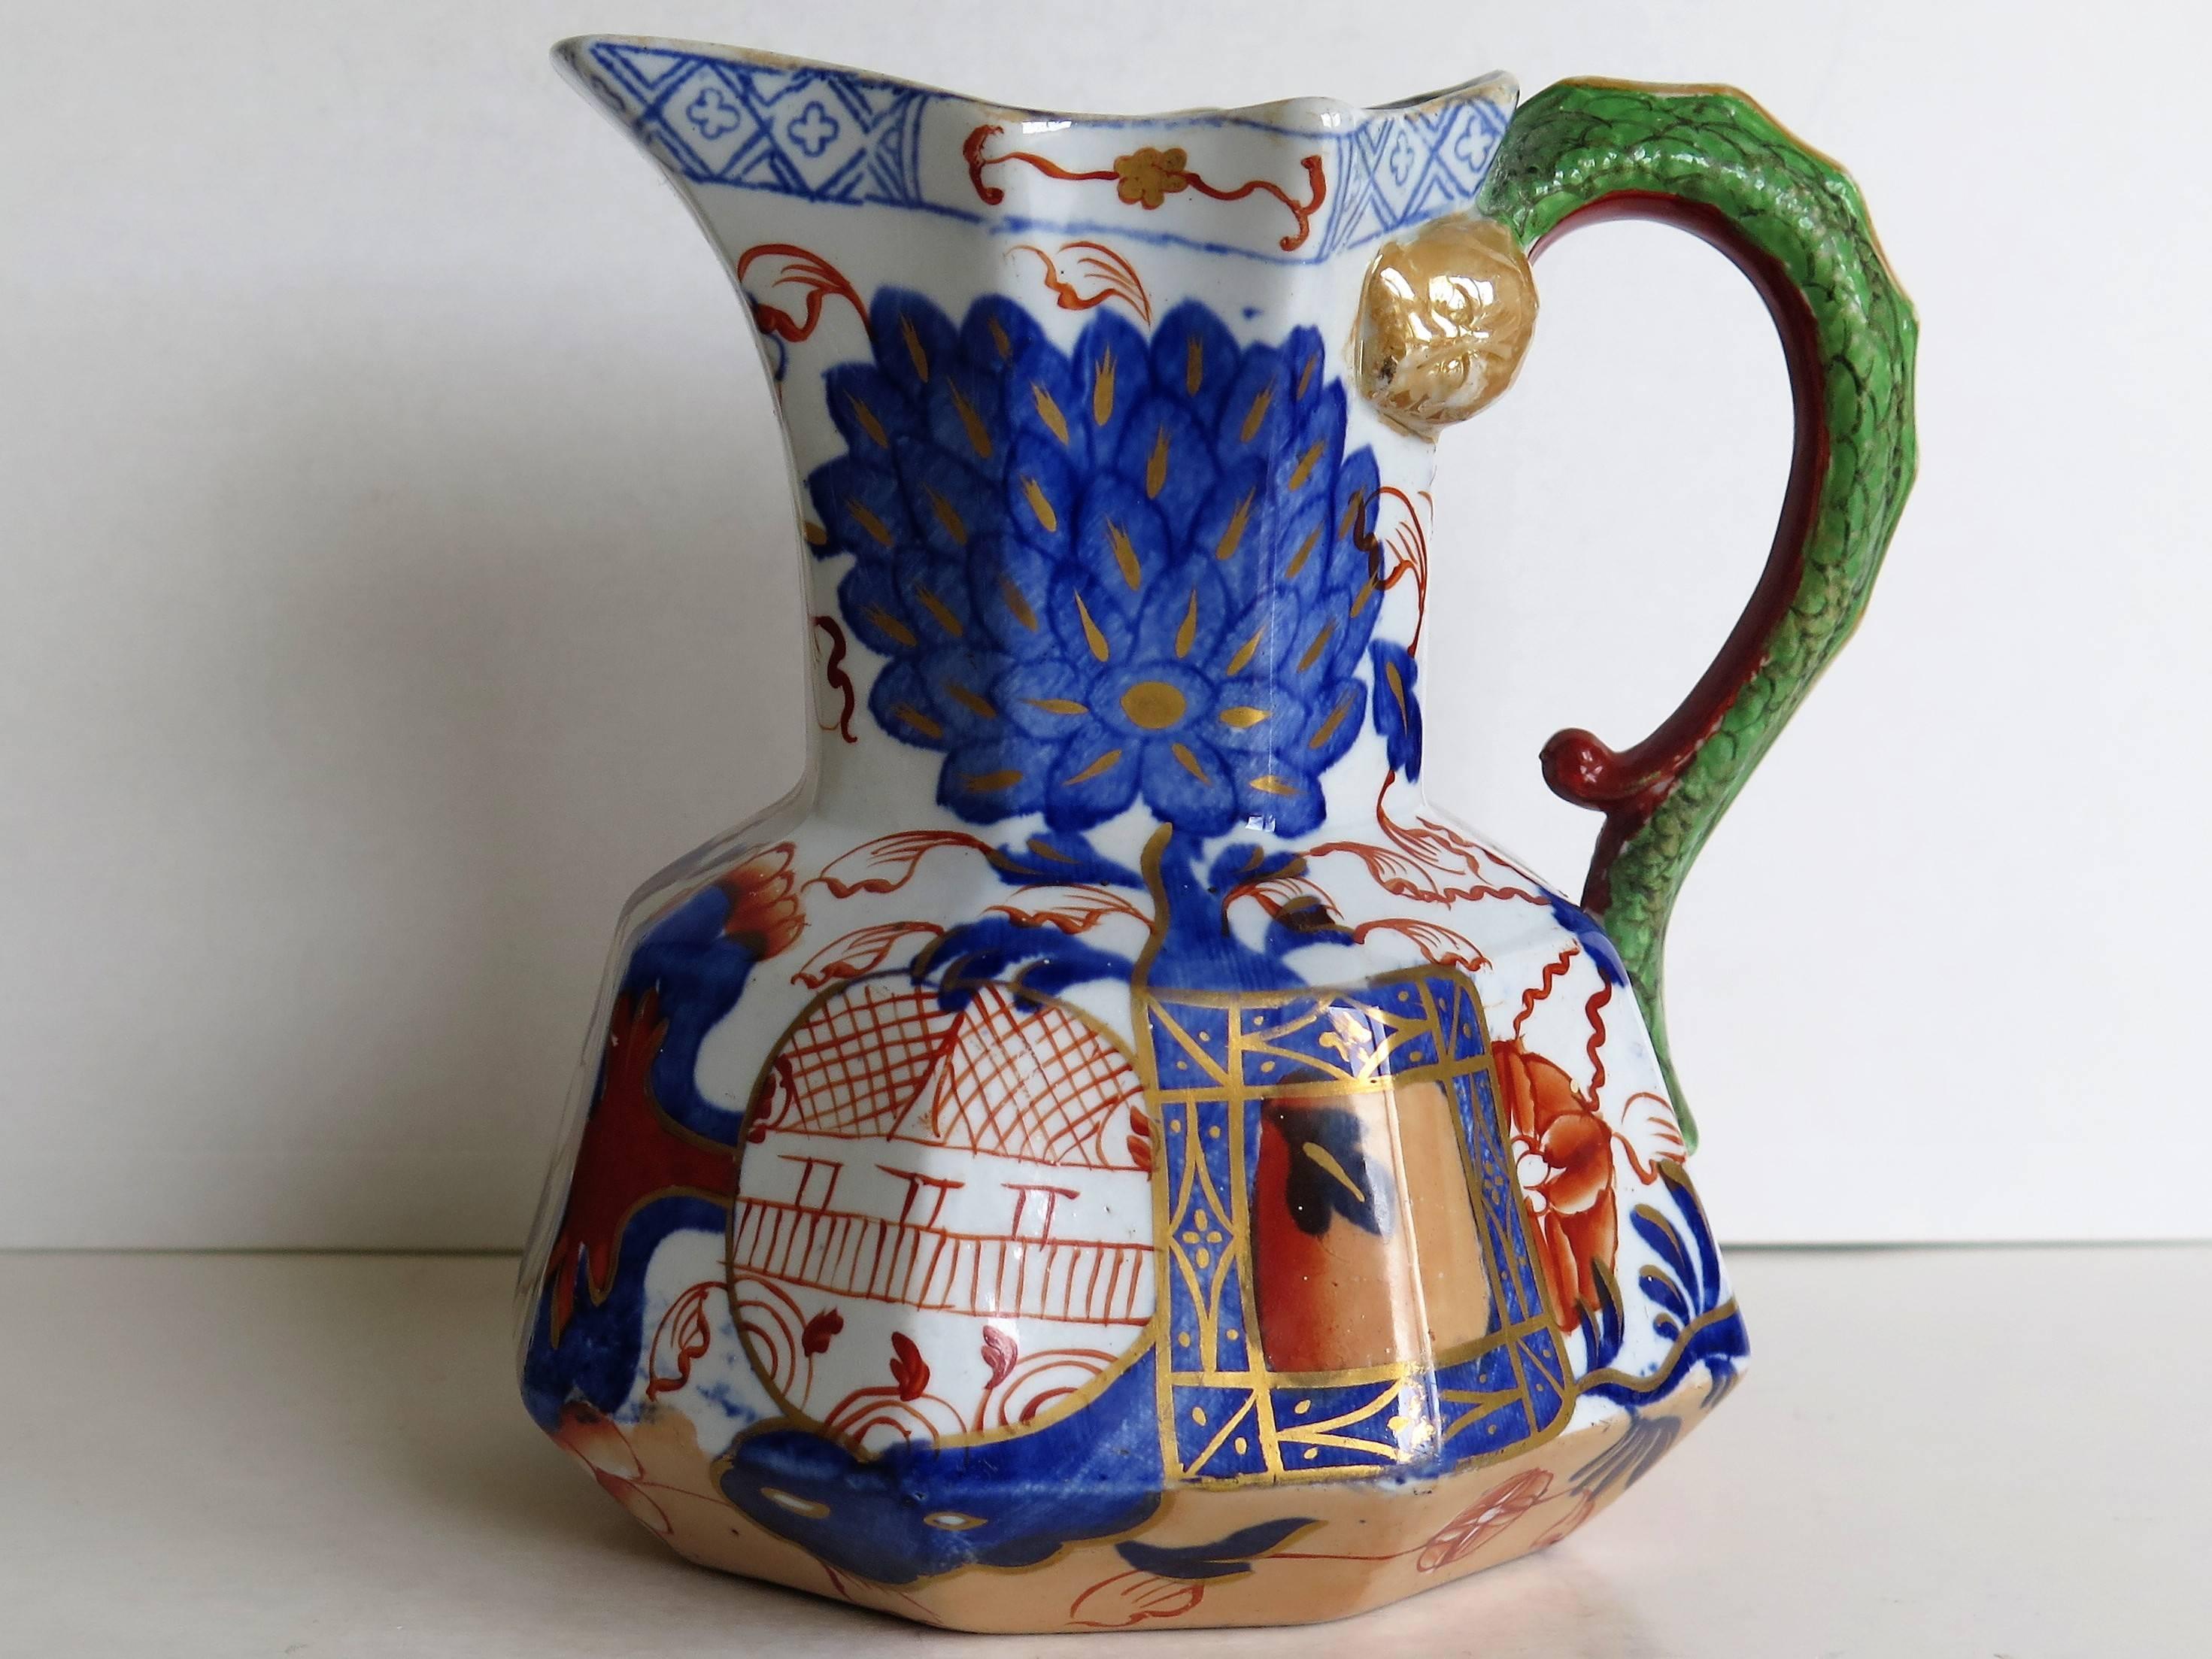 This is a good Hydra jug or Pitcher made by the Davenport Company of Longport, Staffordshire, England in the late Georgian period, circa 1805-1820, made of Ironstone pottery, which Davenport called Stone China.

It is hand decorated in a bold Imari